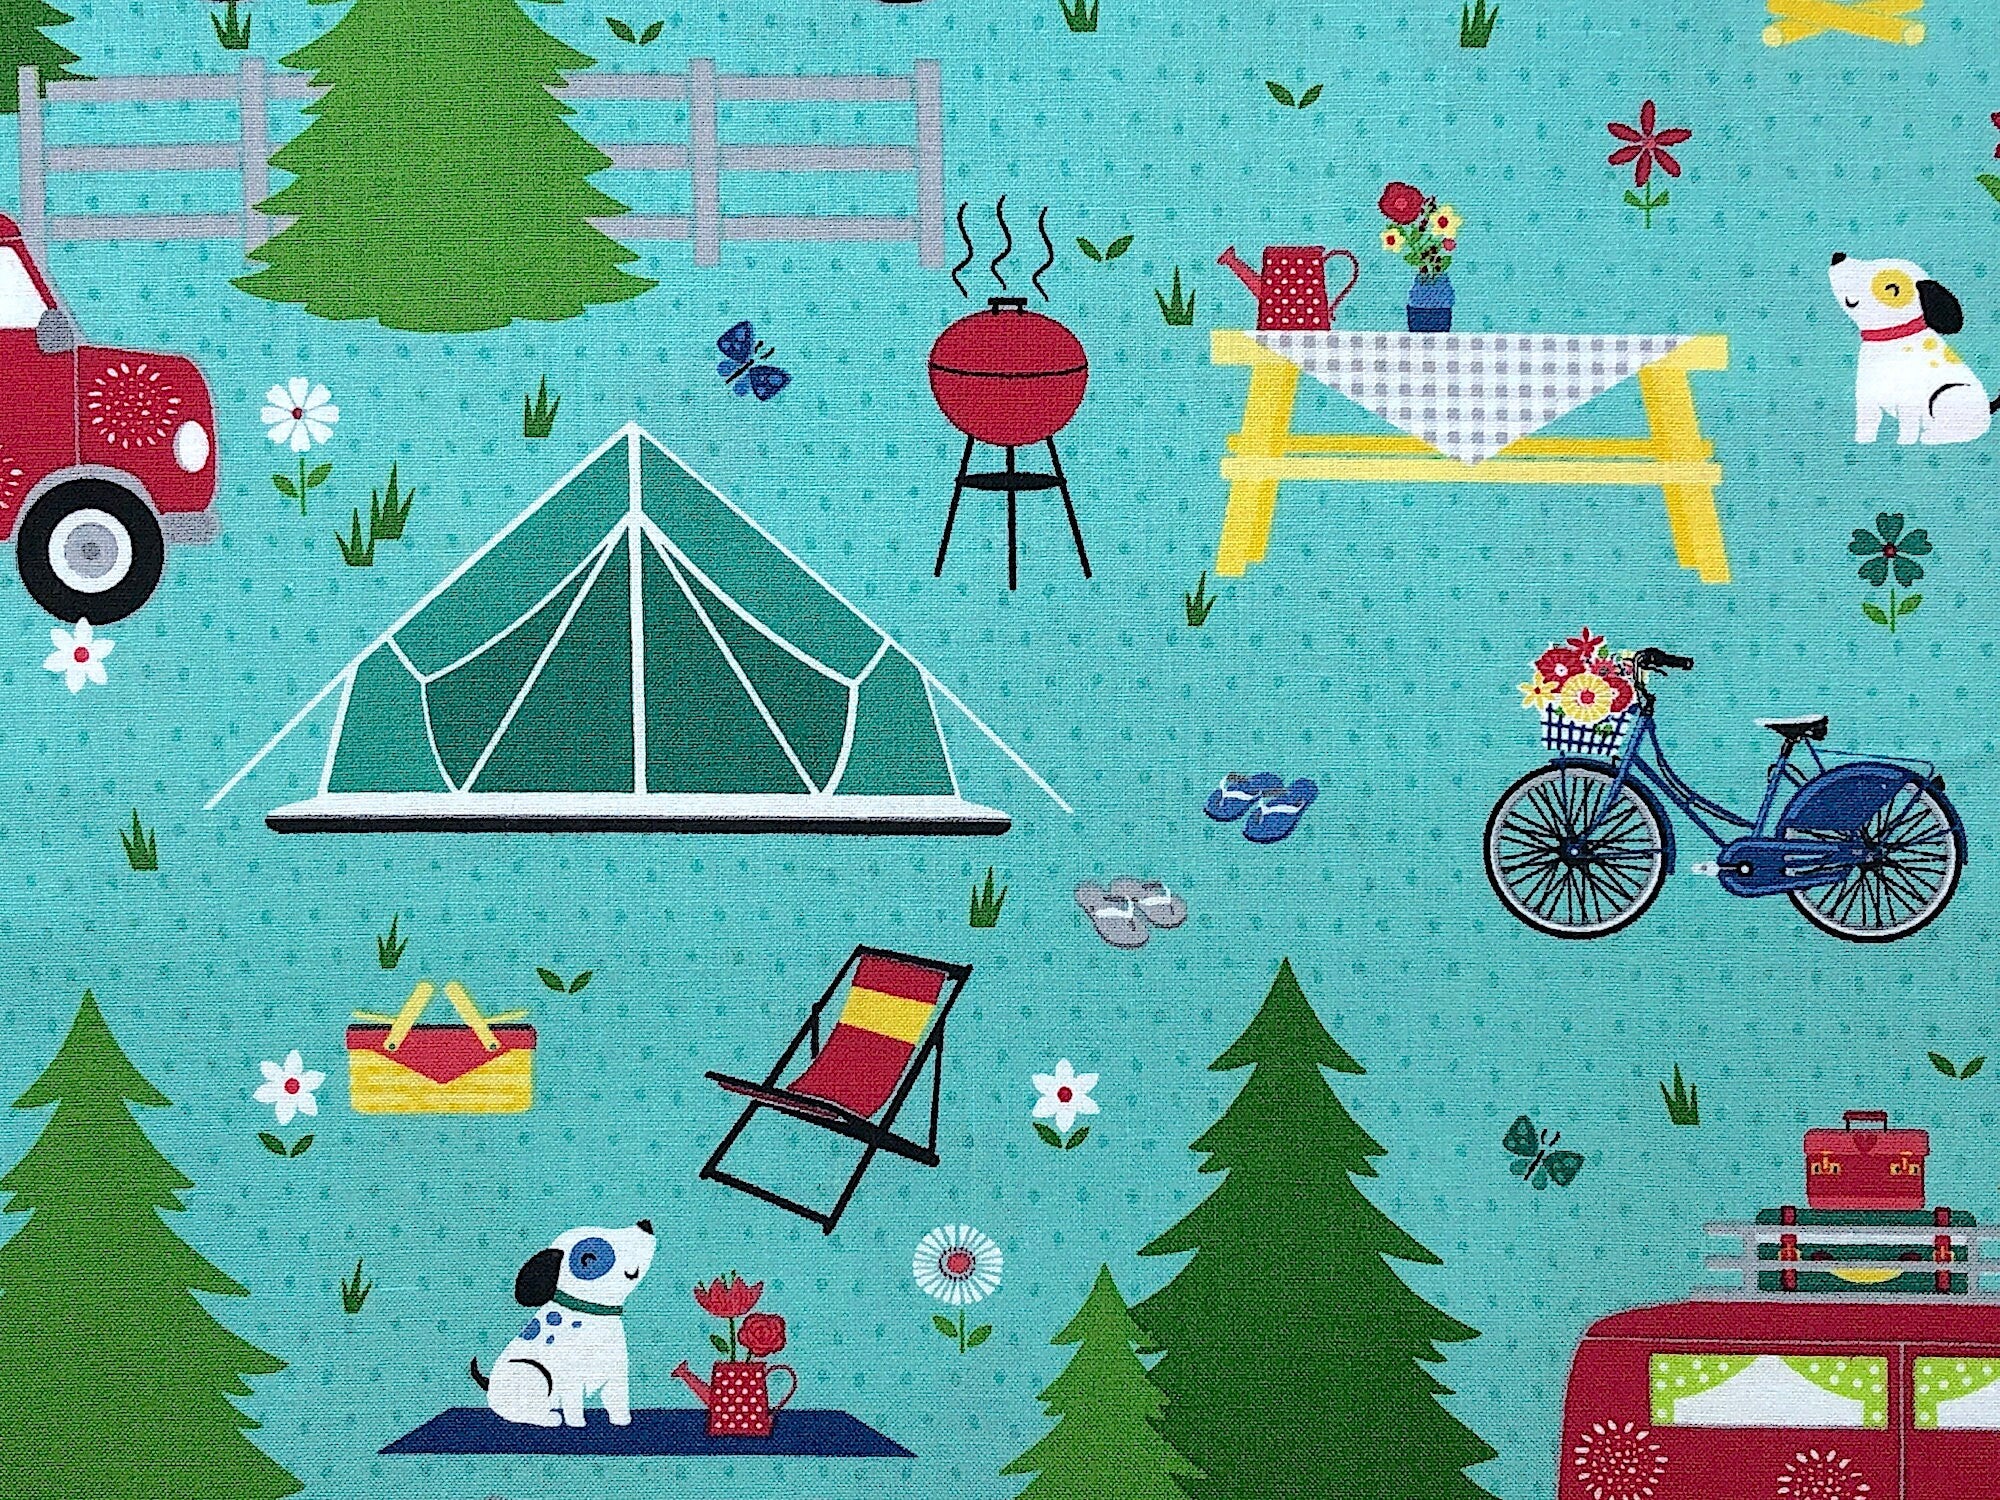 Close up of a camping scene with a tent, picnic table, bicycle, picnic basket, dog and more.